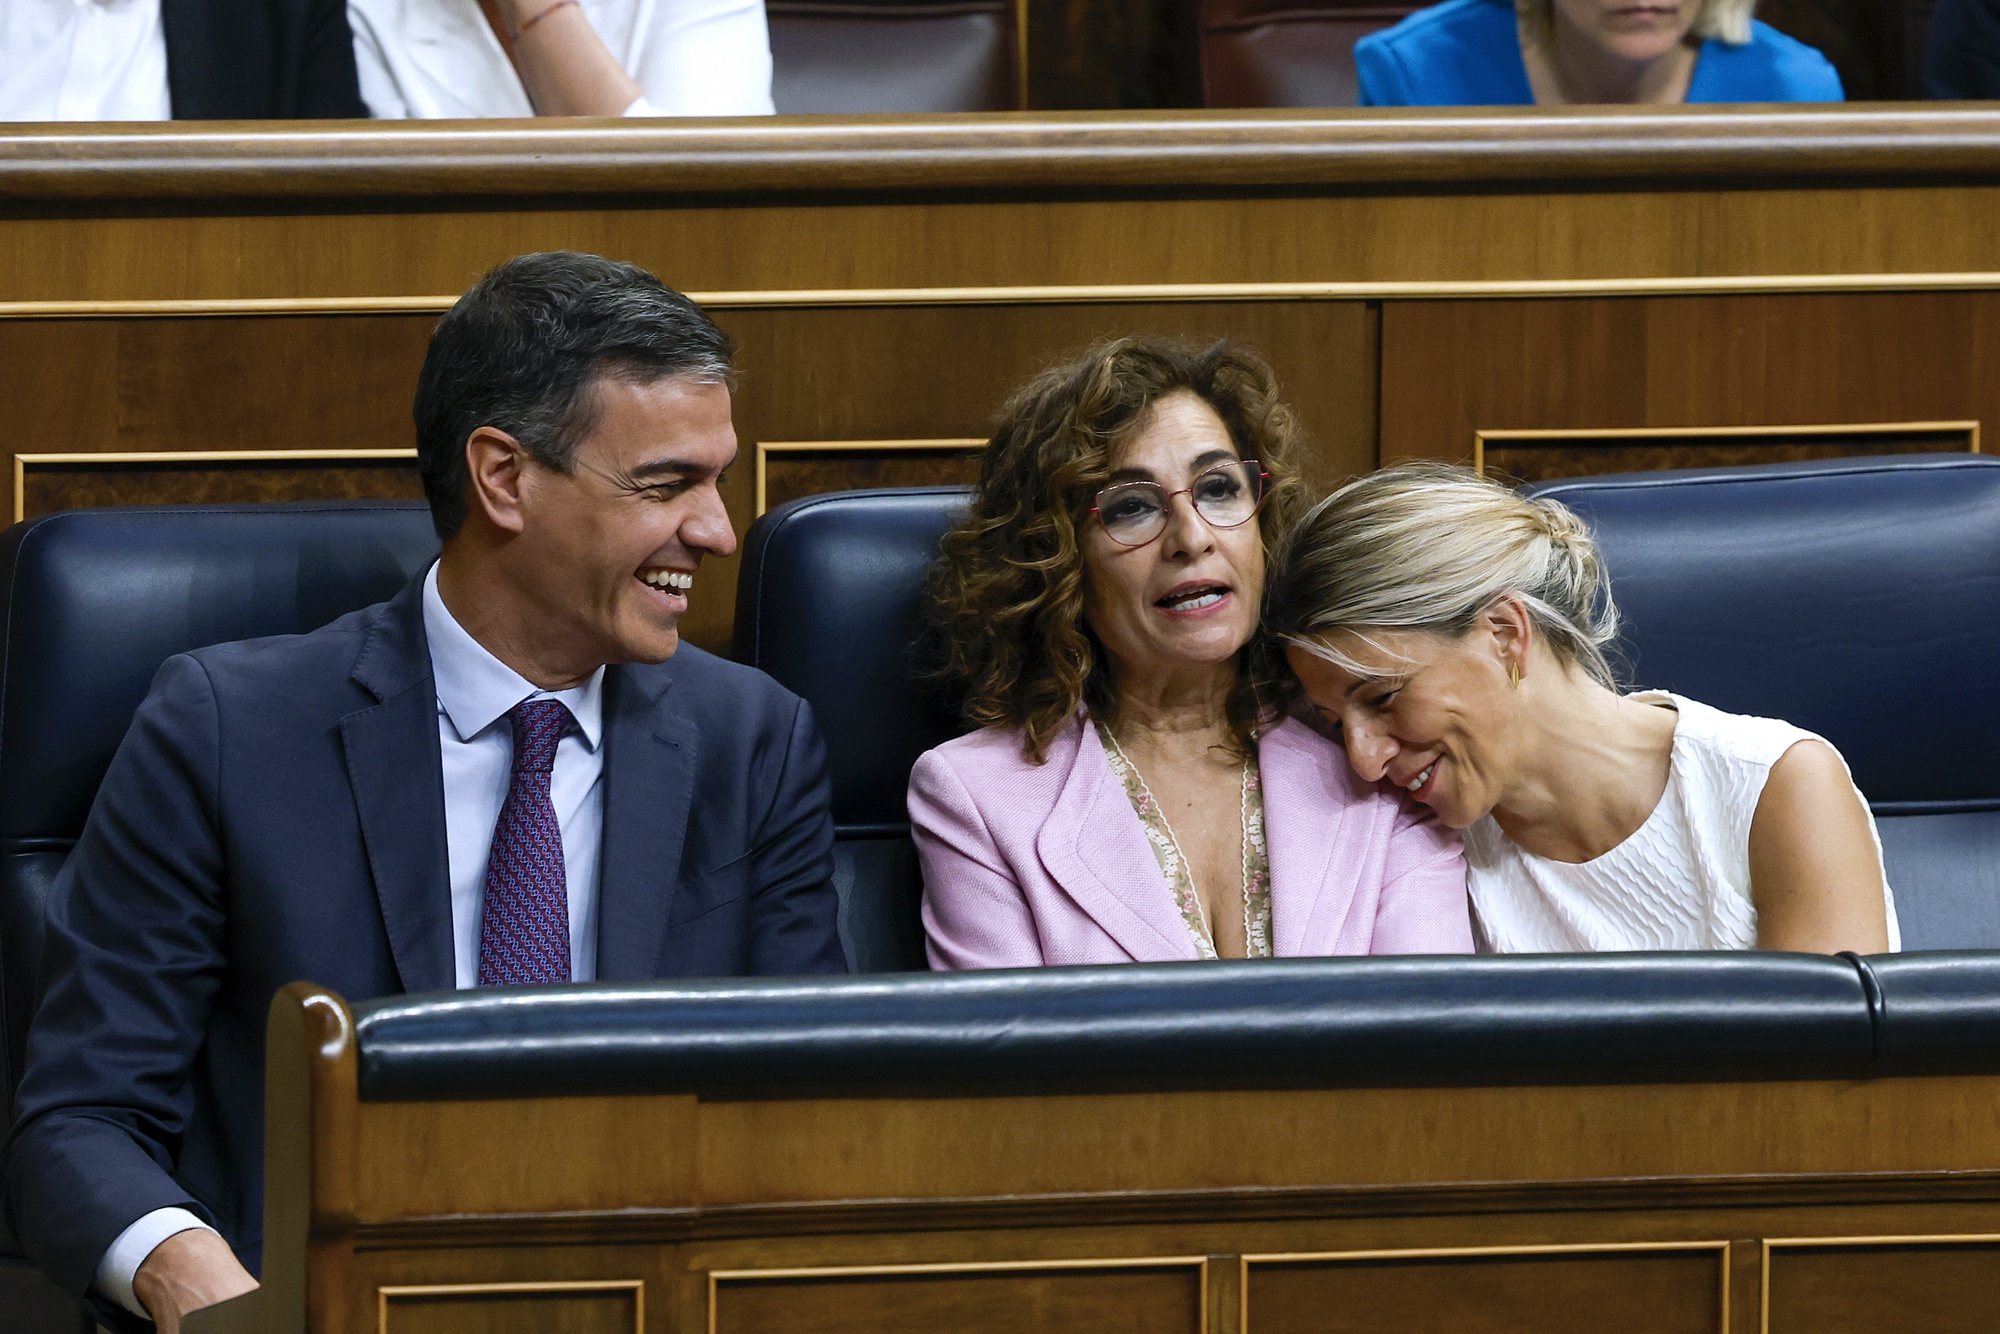 epa11378959 (L-R) Spanish Prime Minister Pedro Sanchez, First Deputy Prime Minister and Minister for Treasury Maria Jesus Montero, and Second Deputy Prime Minister and Minister of Labor Yolanda Diaz attend the debate on the so-called Amnesty Law that is expected to be approved at the Lower House in Madrid, Spain, 30 May 2024. The Amnesty Law is part of the deal struck by the Spanish Prime Minister&#039;s PSOE party to form a coalition Government with the support of Catalan and Basque pro-independent parties following the elections in July 2023. The bill would grant amnesty to people facing legal issues for involvement in Catalonia&#039;s failed 2017 independence bid.  EPA/JJ Guillen